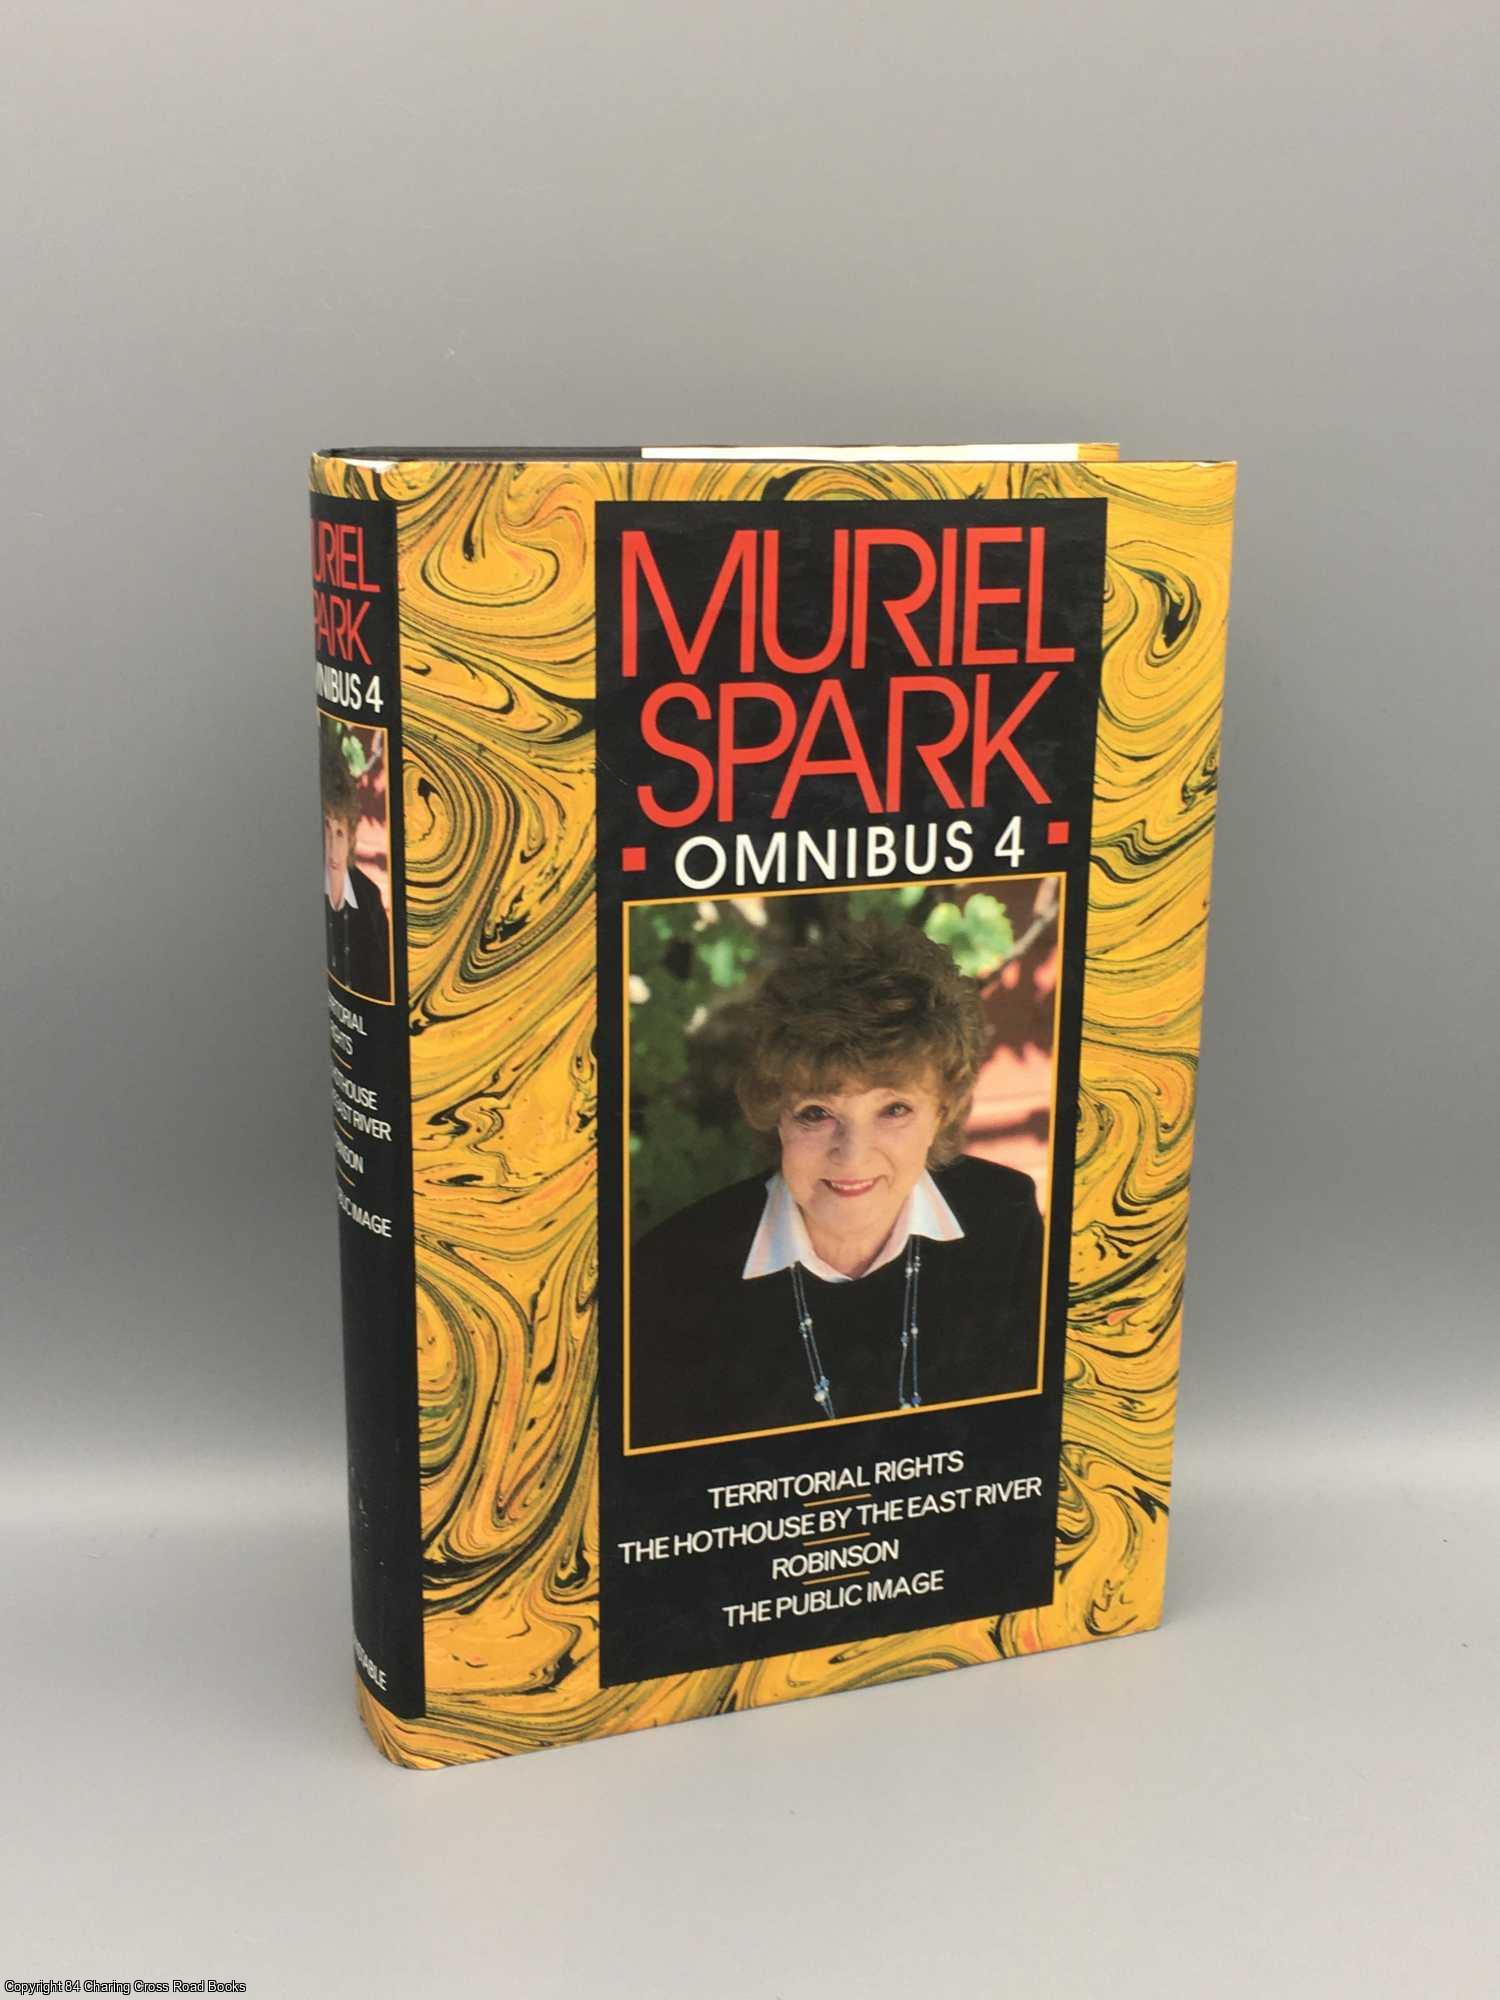 Spark, Muriel - Muriel Spark Omnibus IV: Robinson, Territorial Rights, The Public Image, The Hothouse by the East River